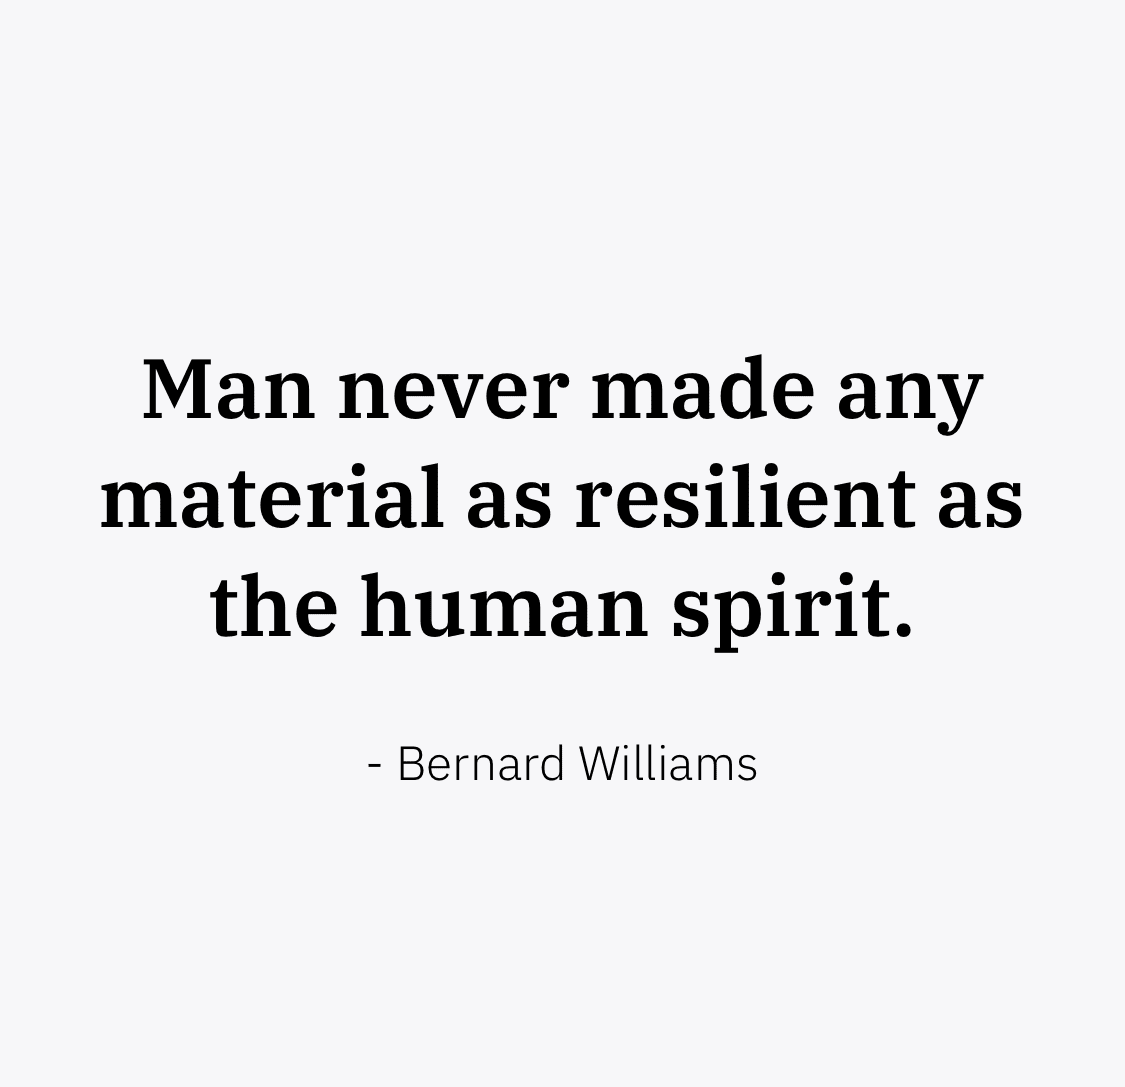 Nothing is as resilient as the Human Spirit!